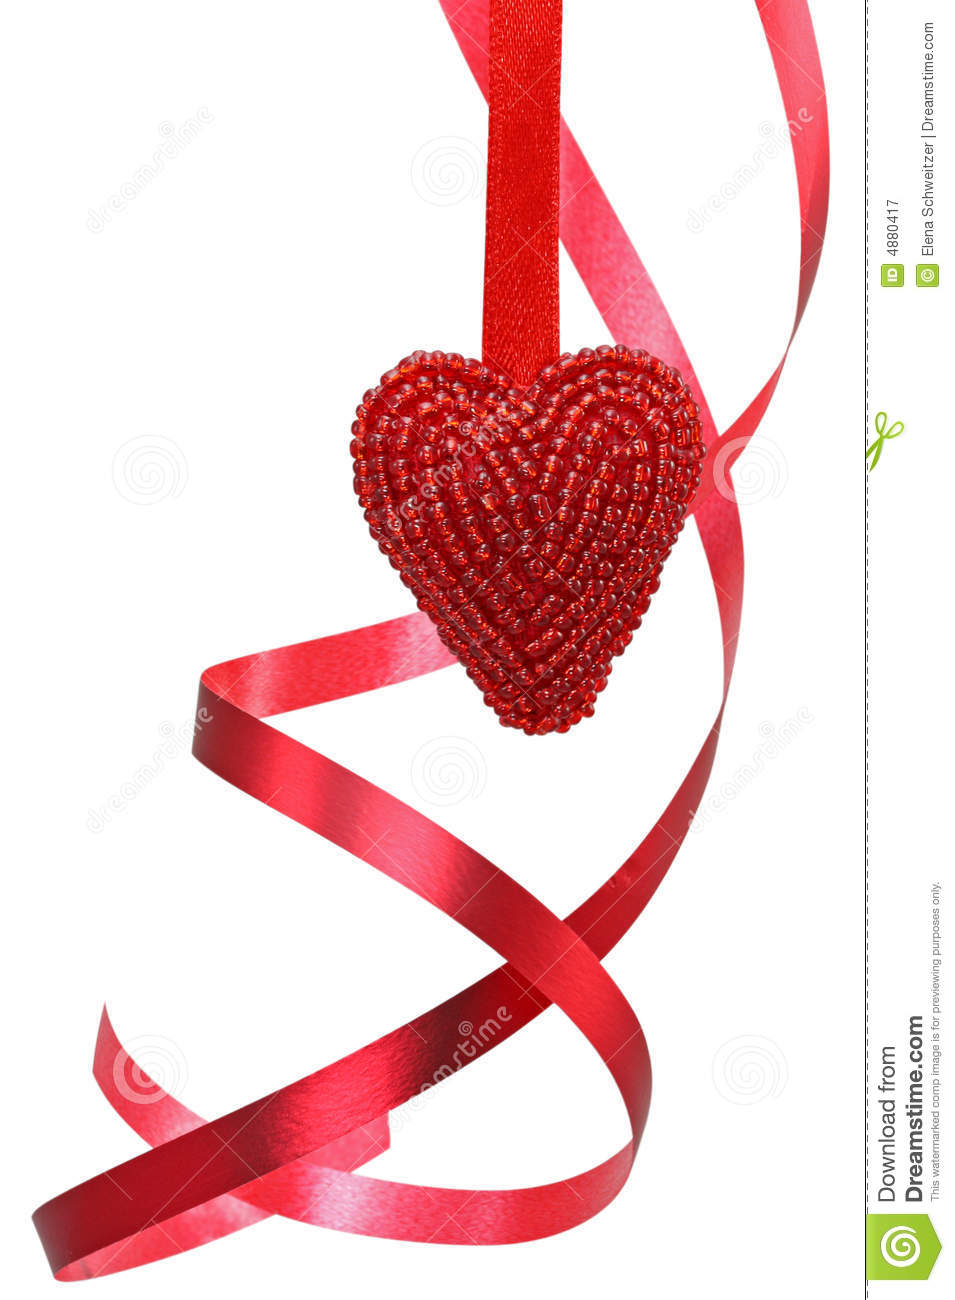 Red Heart And Curly Ribbon Royalty Free Stock Photography   Image